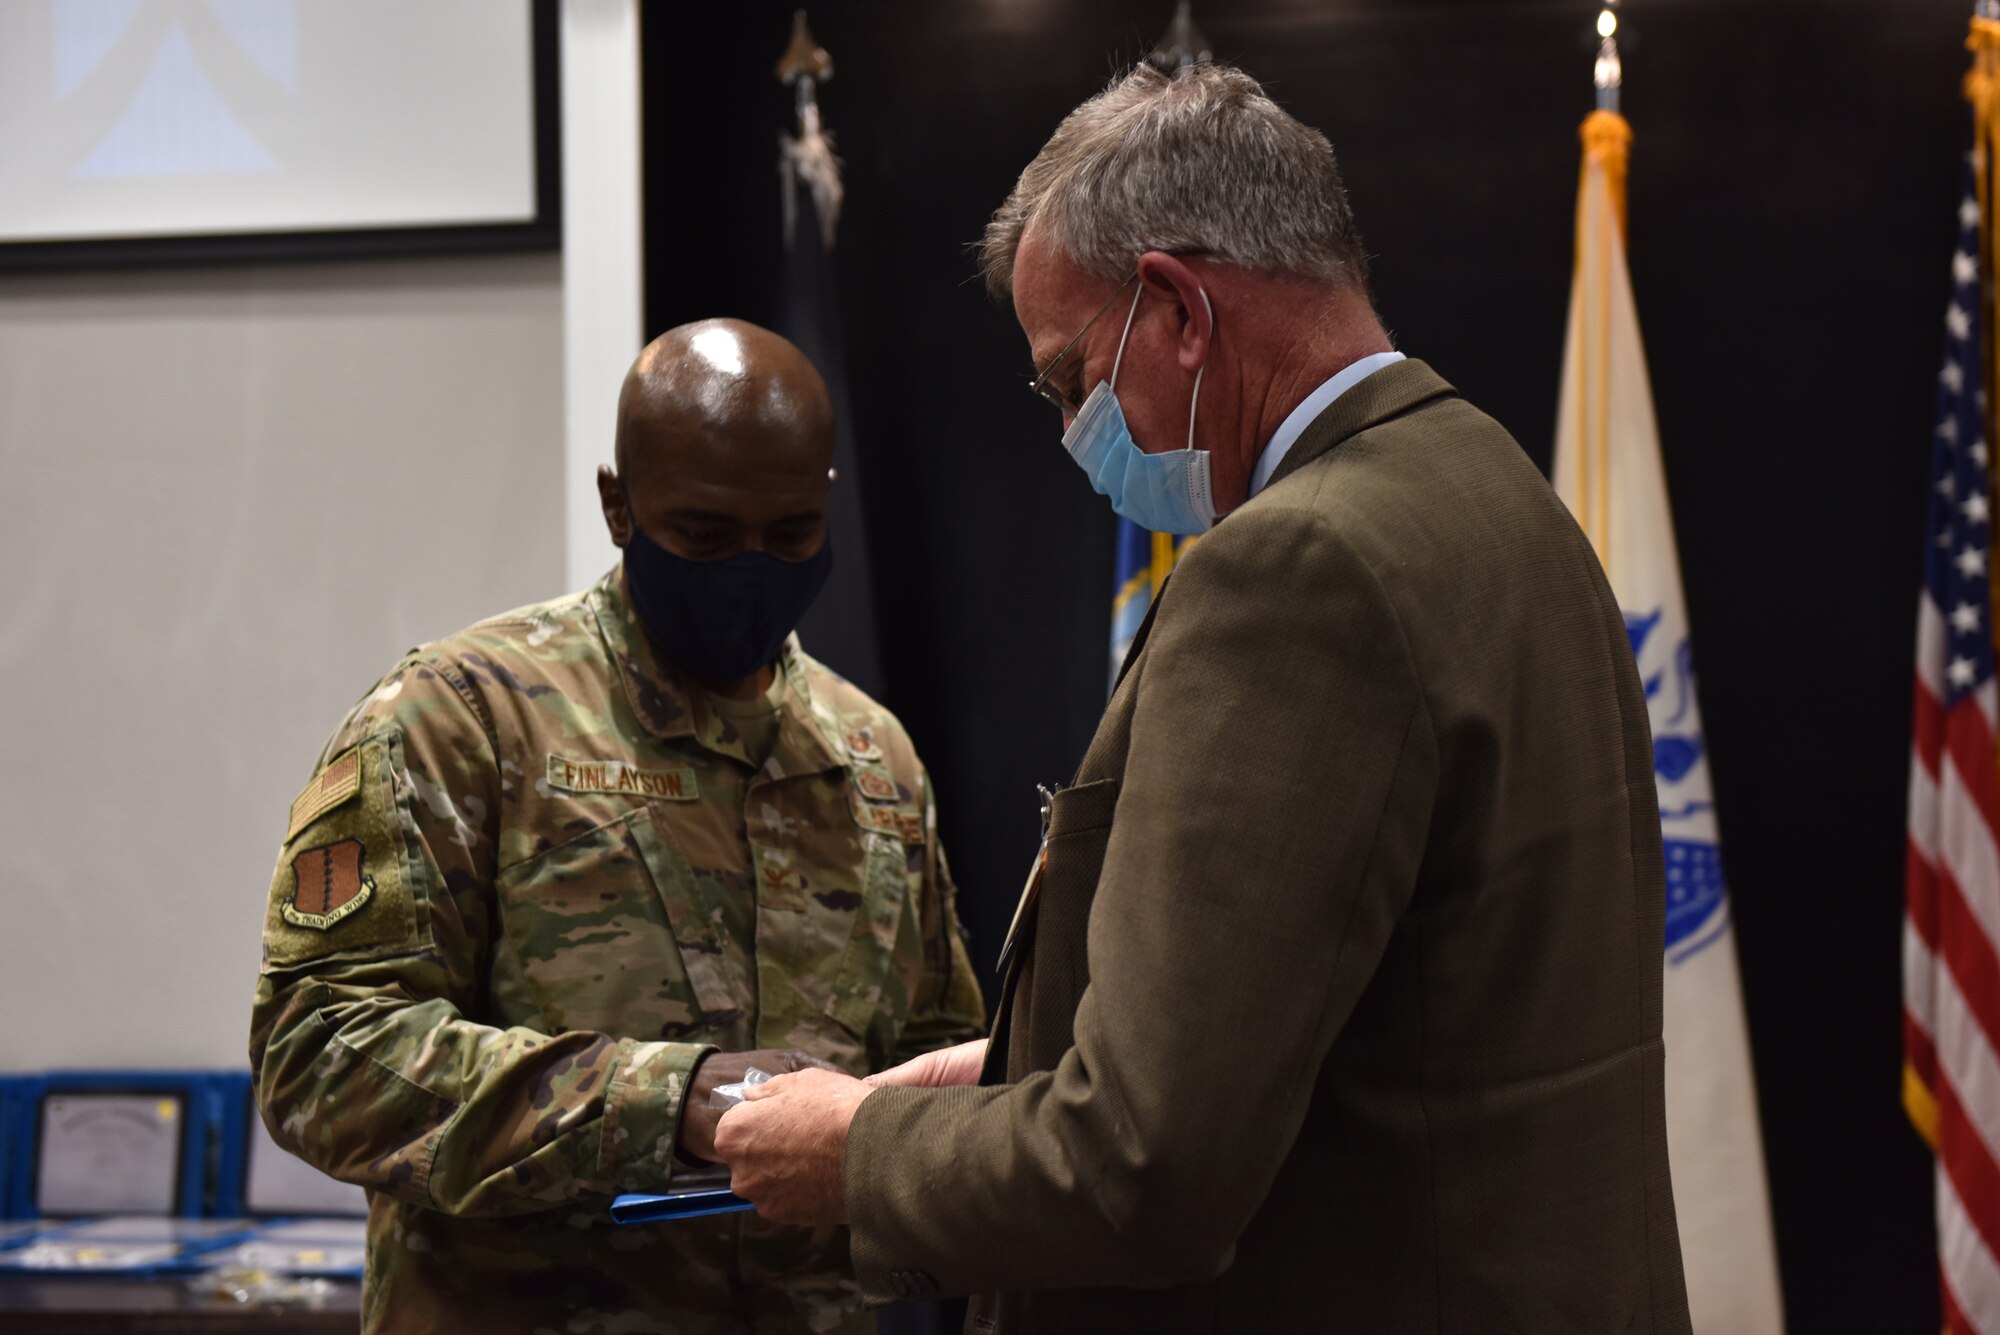 U.S. Air Force Col. James Finlayson, 17th Training Wing vice commander, presents Robert Bluthardt, Honorary Commander Alumni, a certificate at the Honorary Commander graduation in the Event Center on Goodfellow Air Force Base, Texas, April 9, 2021. Graduates were also given a pin and wing coin to thank them for their hard work during their time as Honorary Commanders. (U.S. Air Force photo by Staff Sgt. Seraiah Wolf)